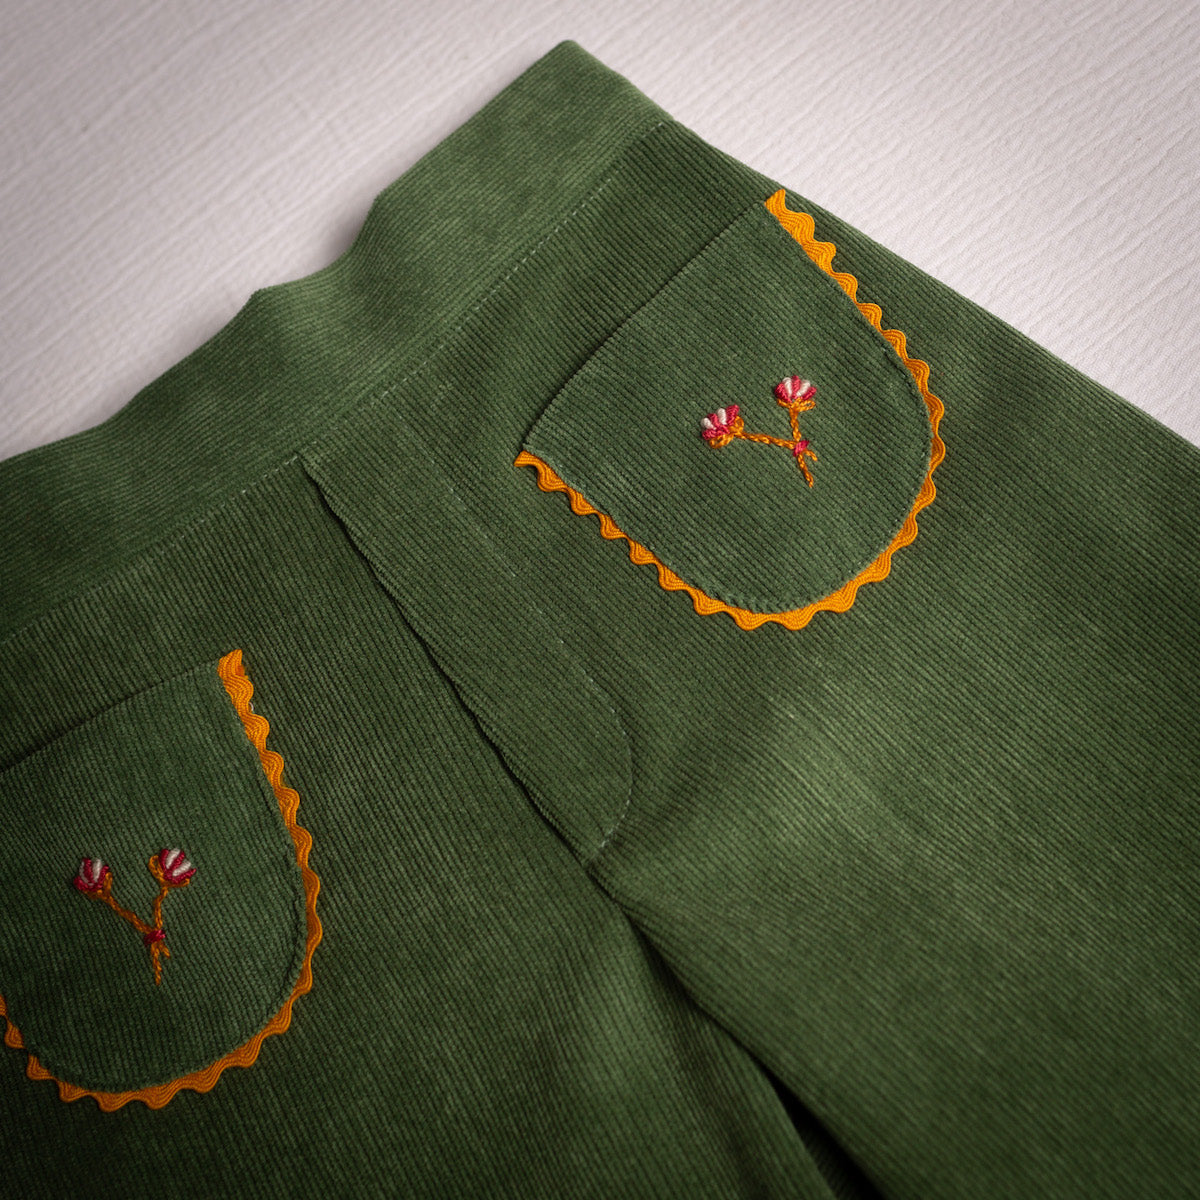 Olive corduroy embroidered bell bottom pants